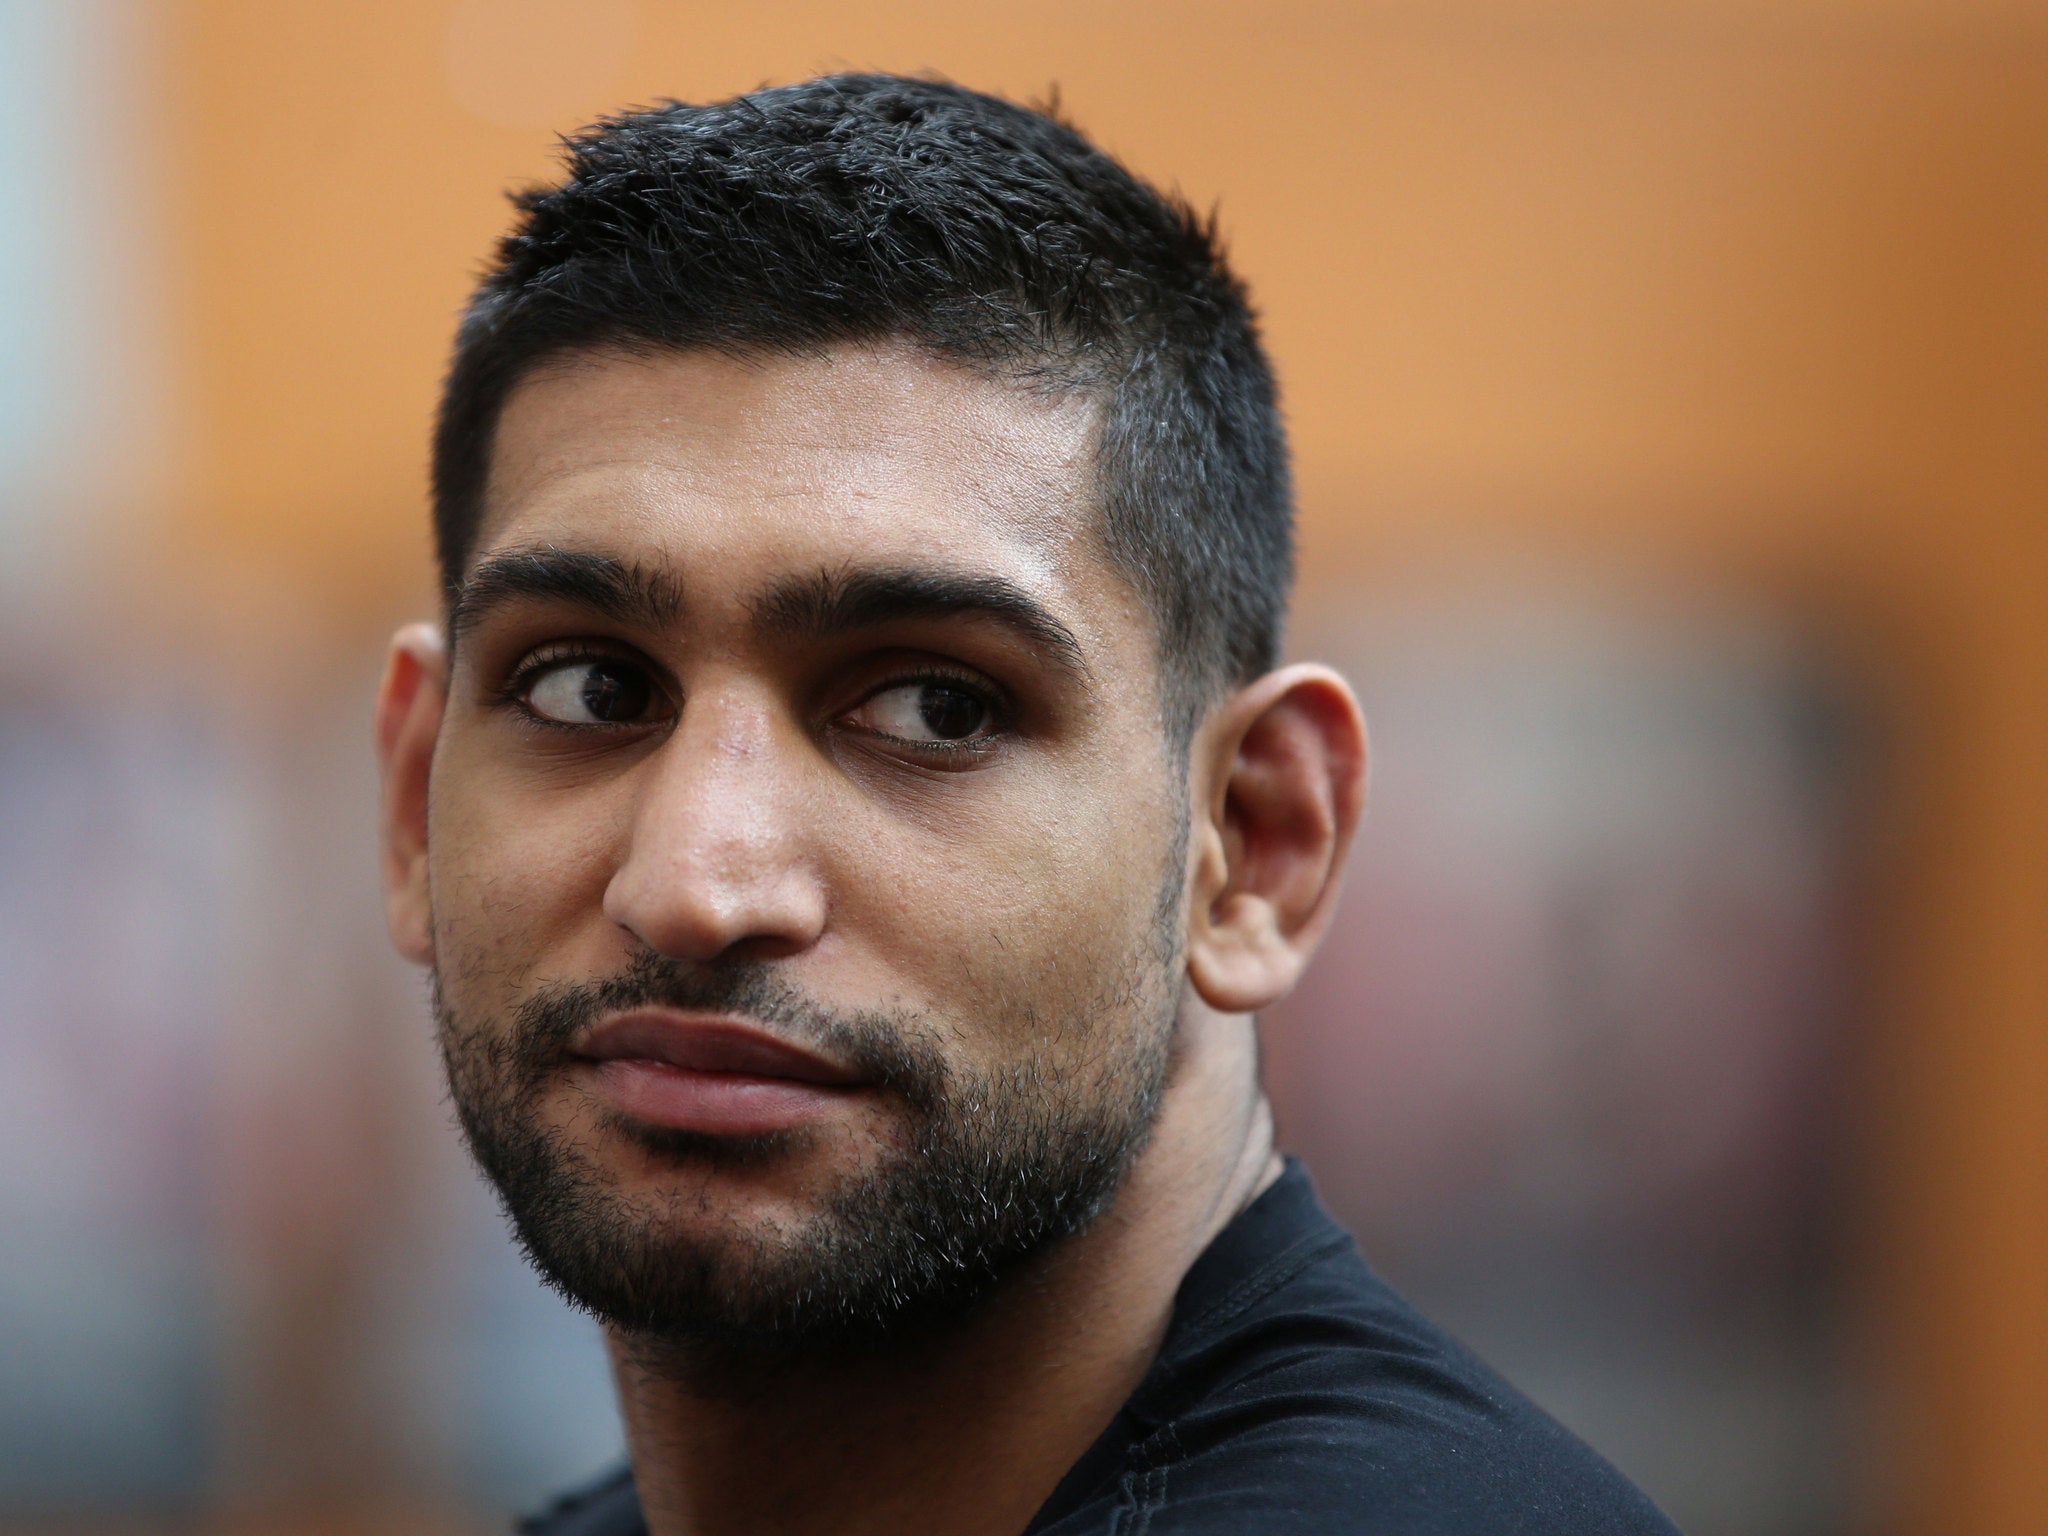 Amir Khan pictured during training